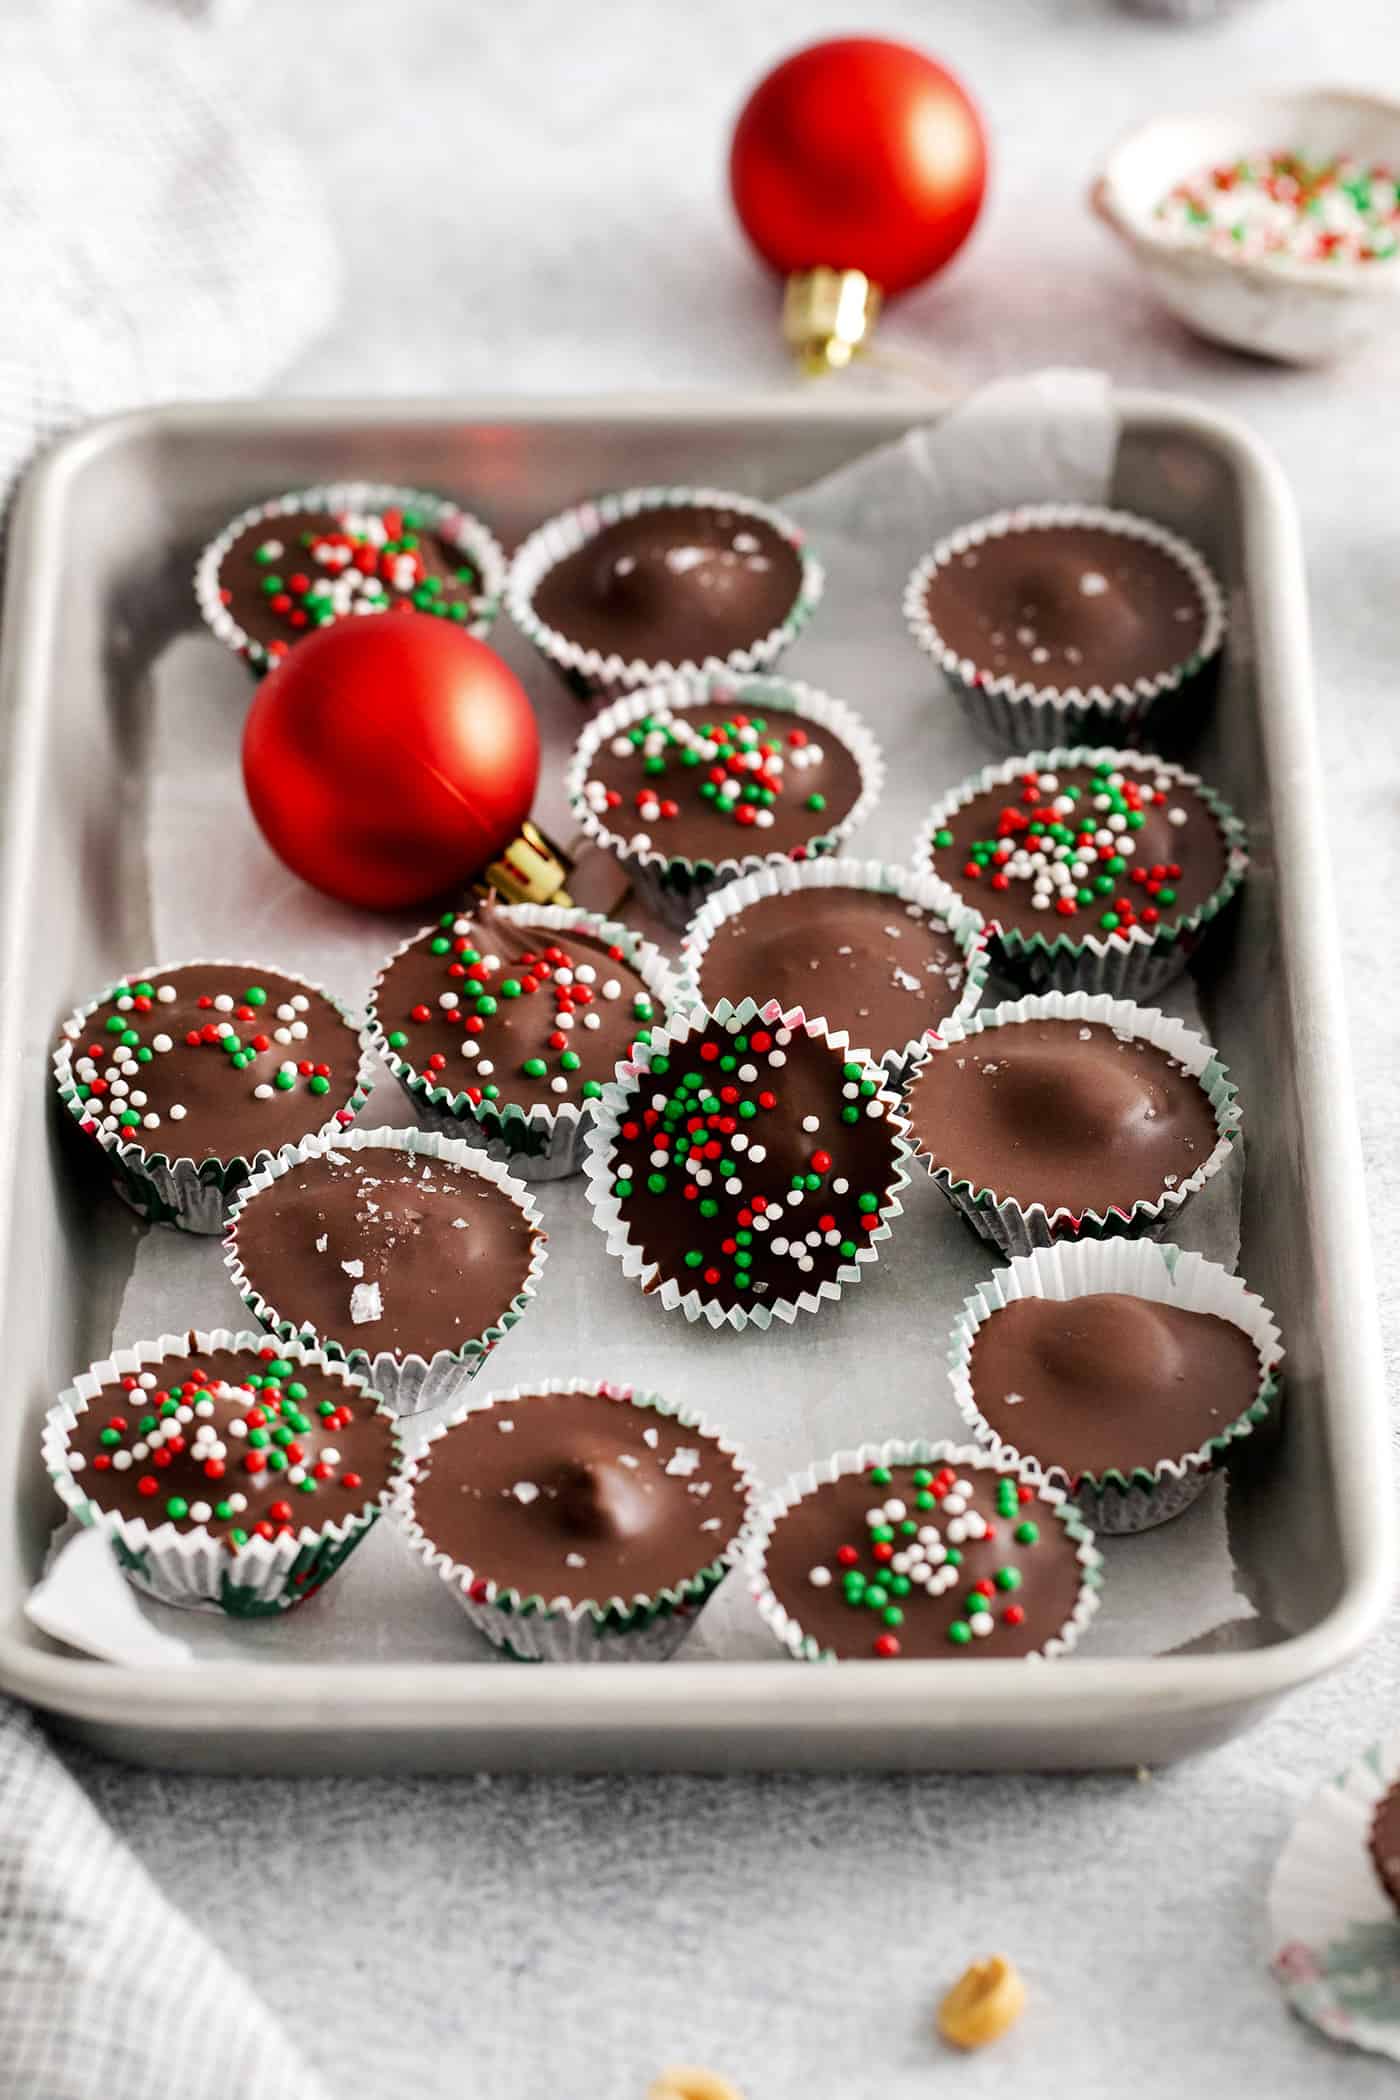 Peanut butter cups with Christmas sprinkles on a baking sheet